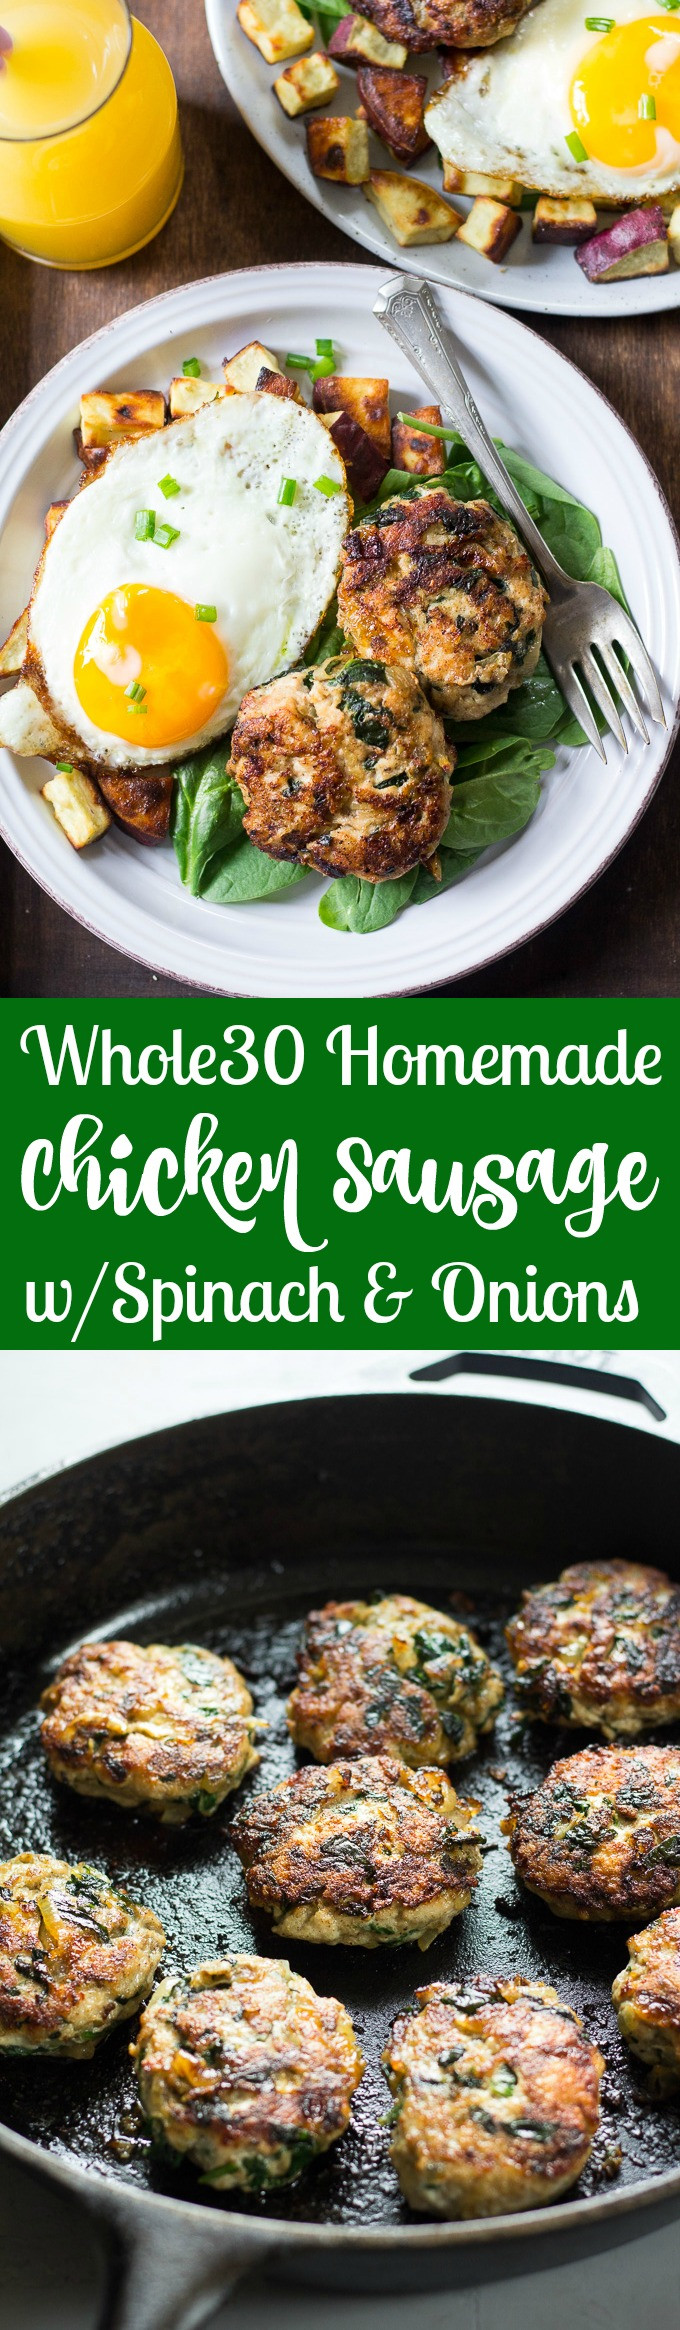 Homemade Chicken Sausage
 Homemade Chicken Sausage with Spinach and ions Whole30